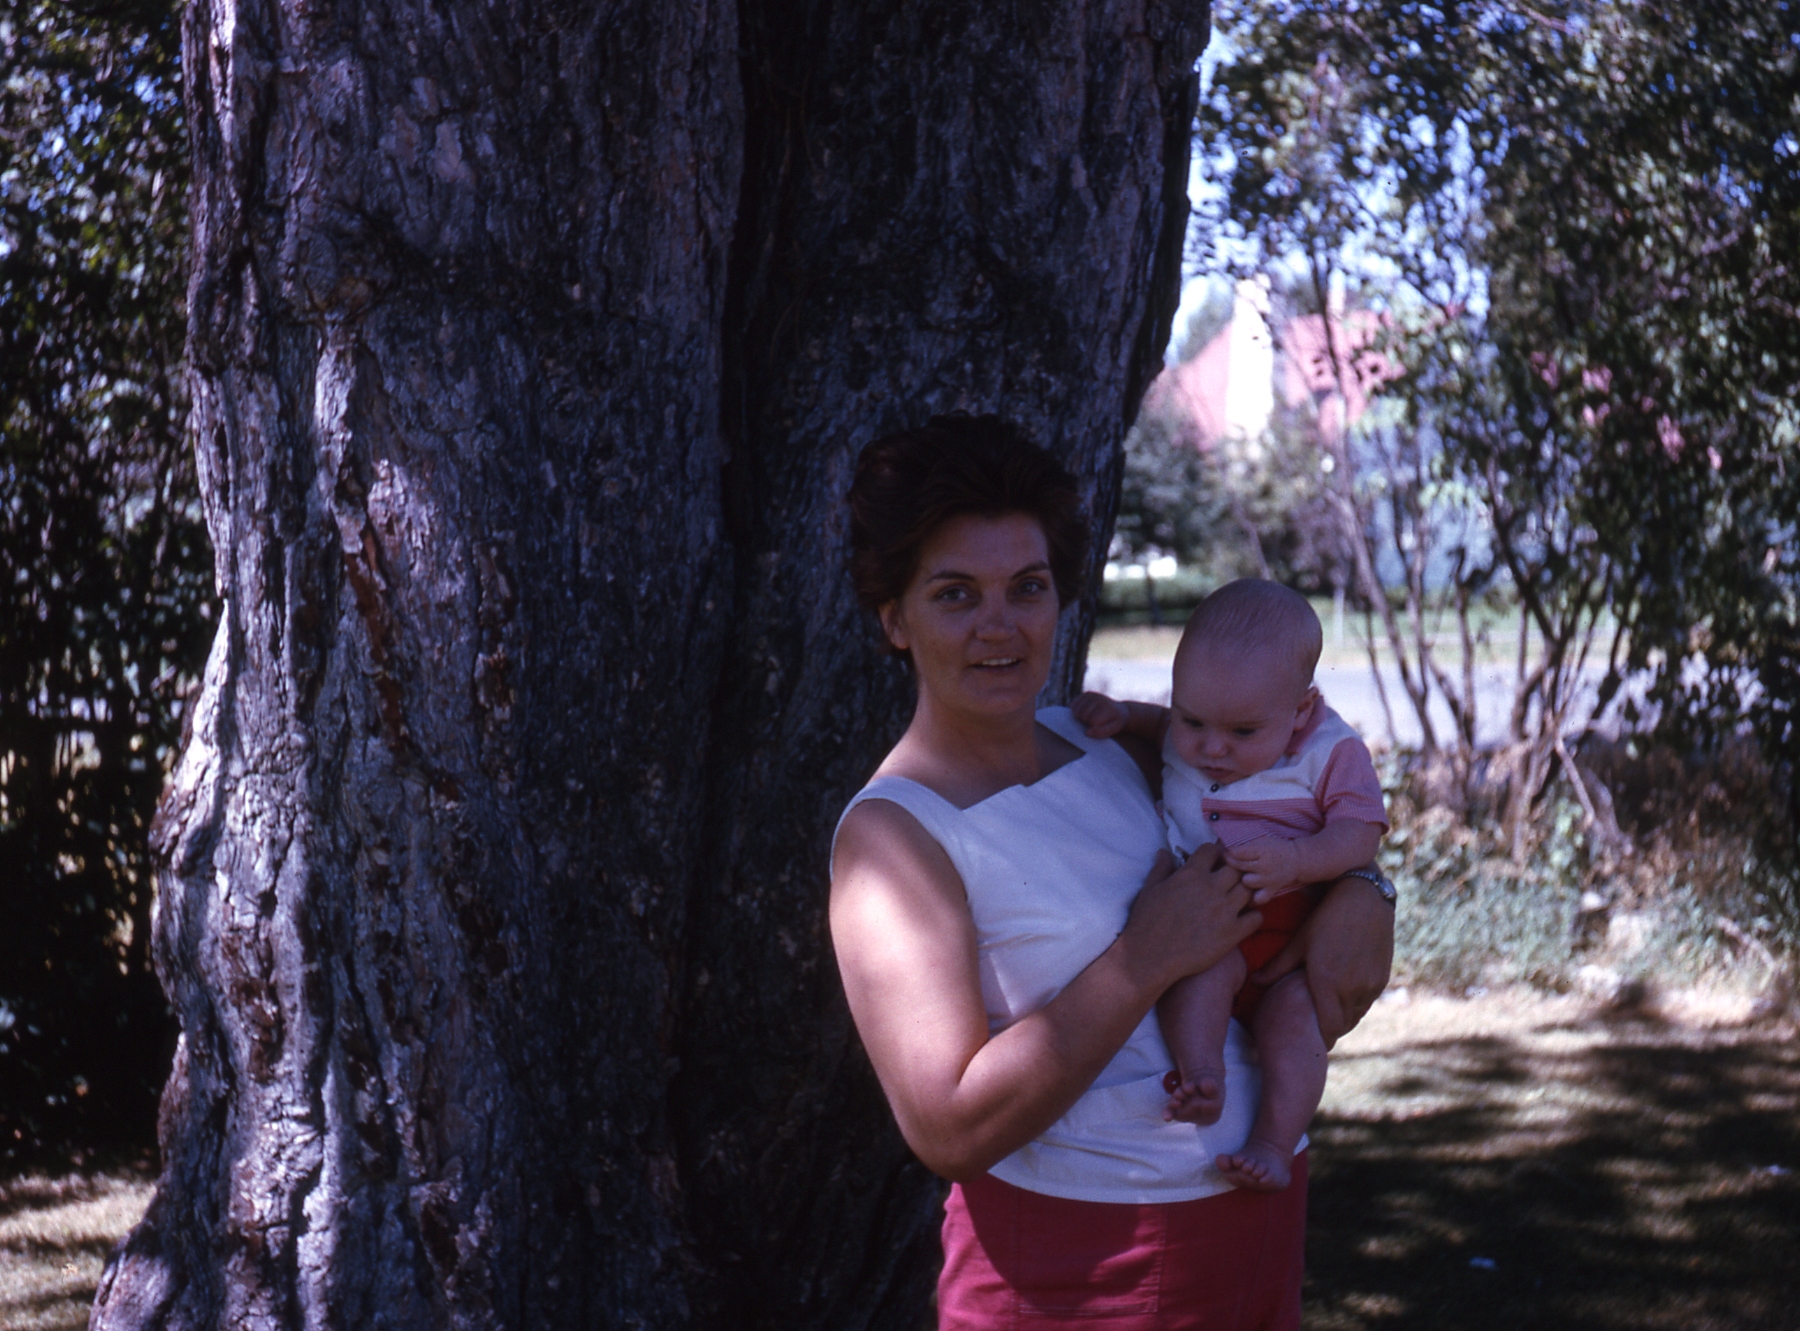 1966, 11, 04:  Mom and unknown baby